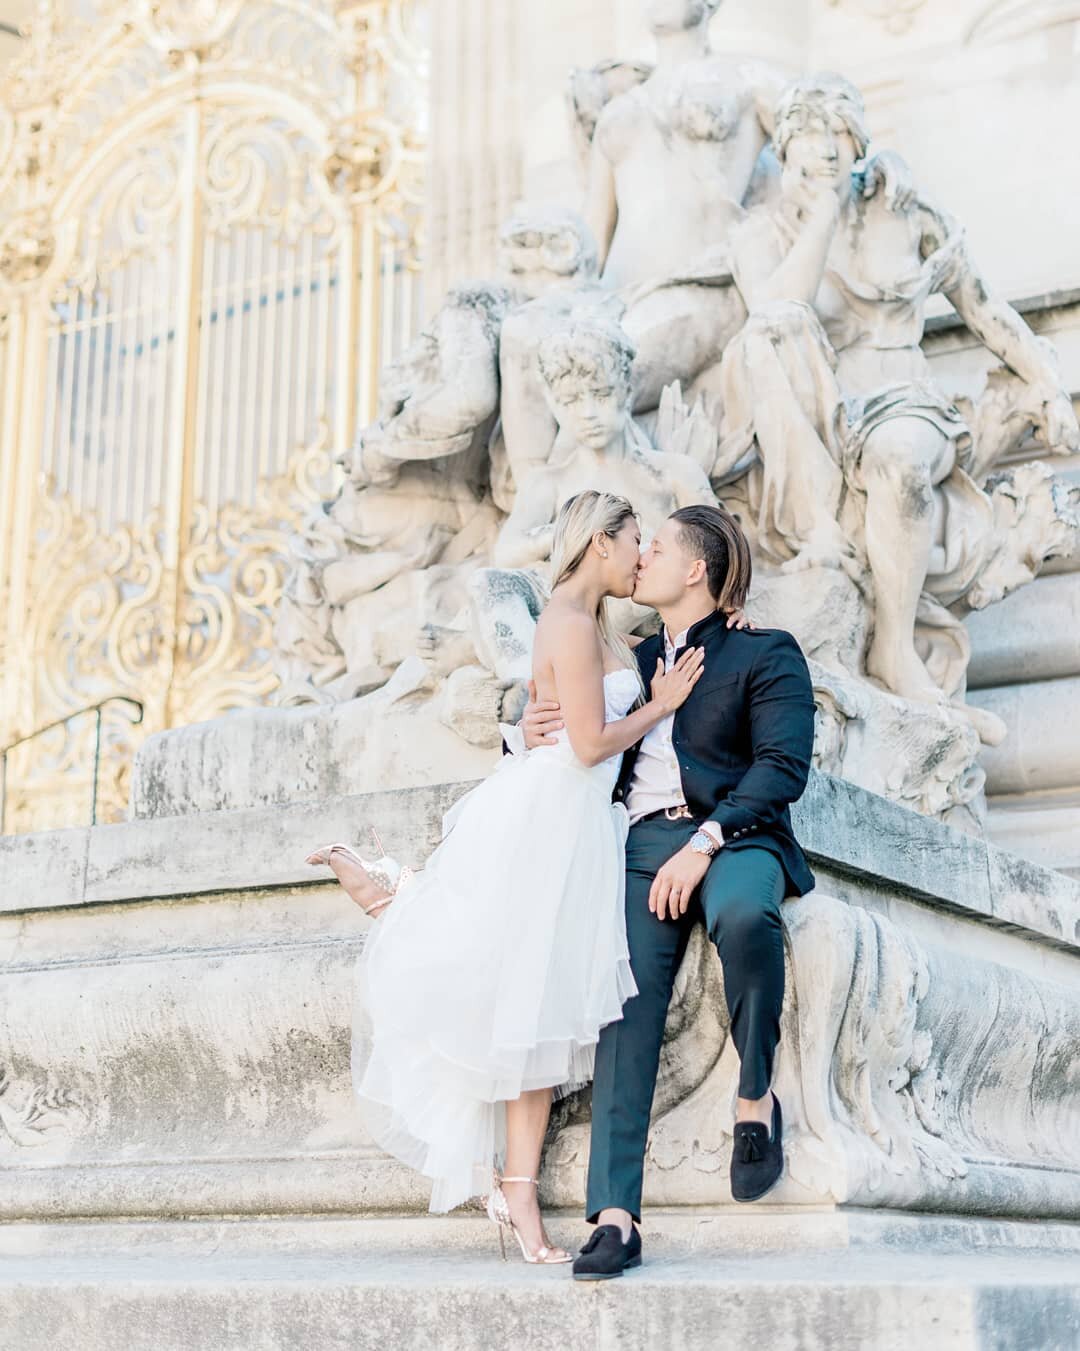 Sharing a photograph I took in Paris of an adorable couple from Miami that I am happy to call my friends. So many things to celebrate currently in their lives! 💛
.
#timmoore_lovestory
.
.
#parisphotographer #babyincoming #paris #statues #epicshoes #